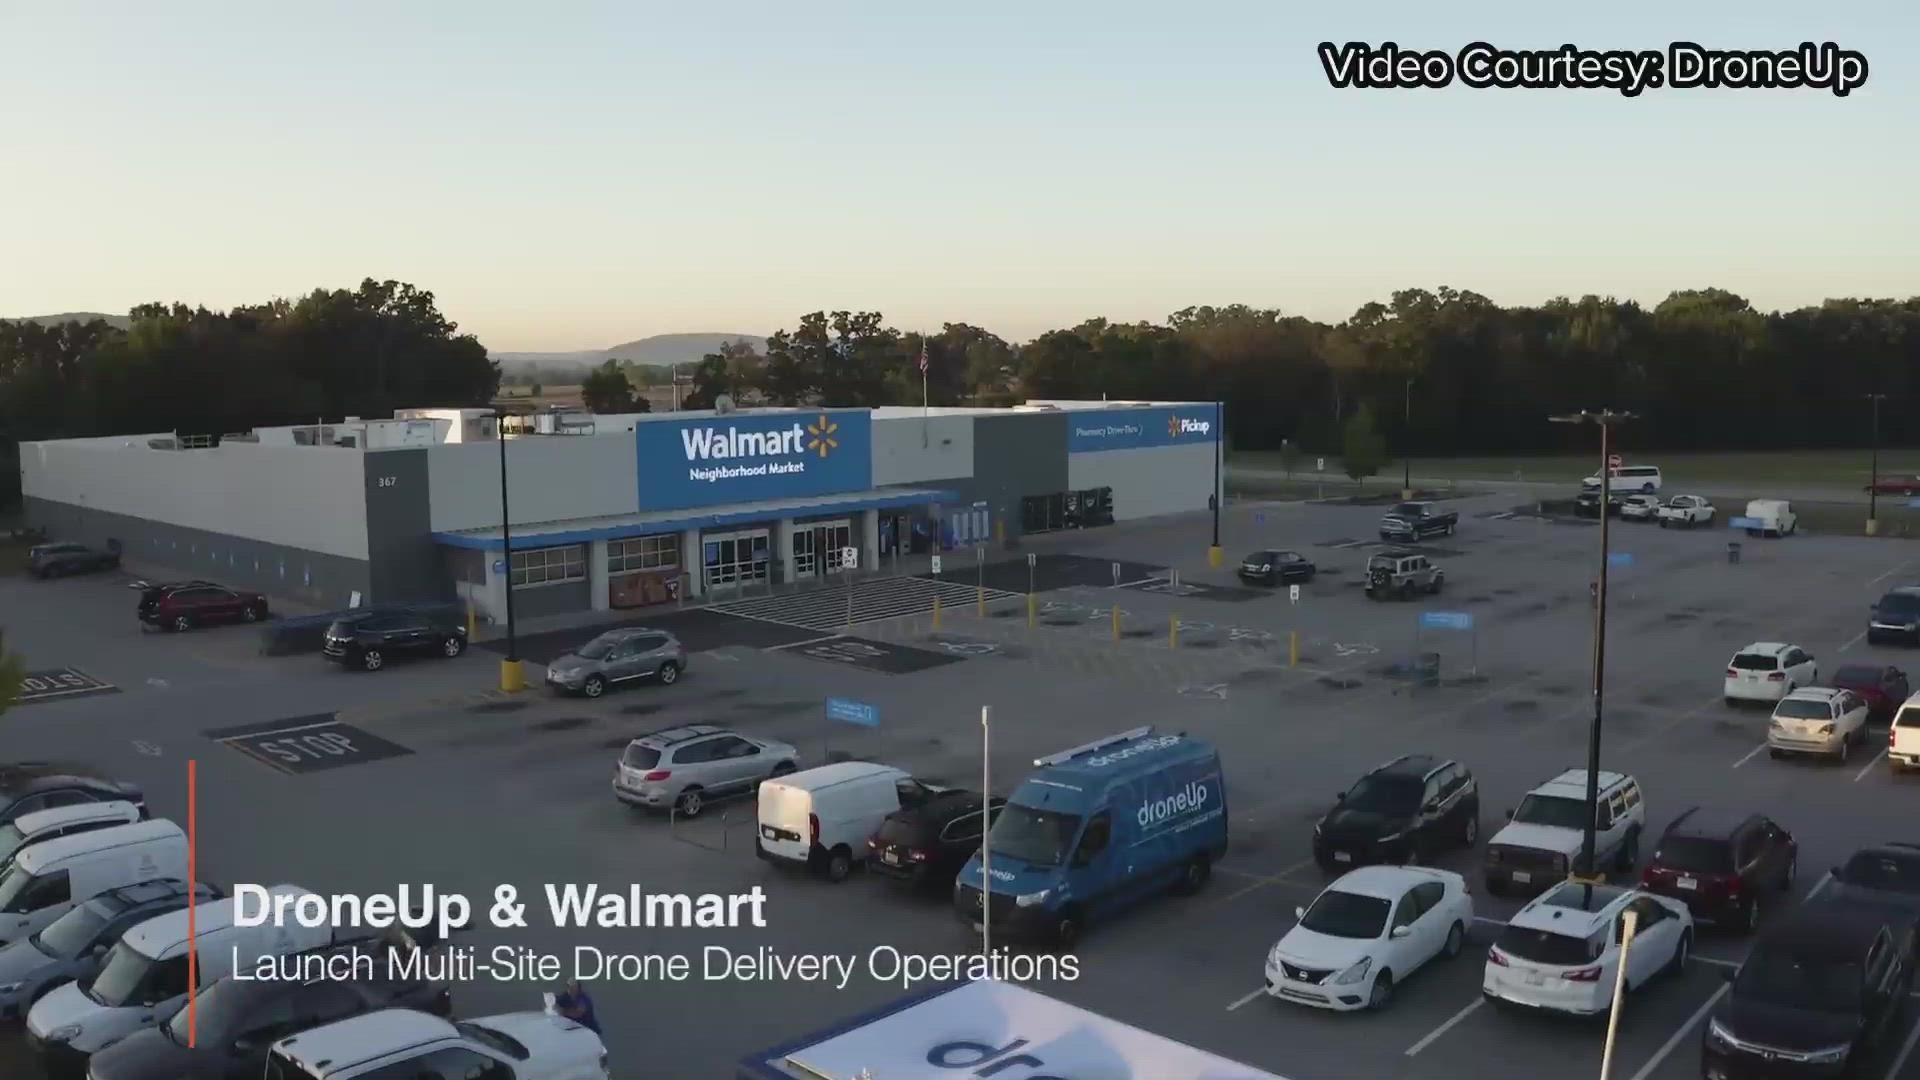 DroneUp and Walmart show off their at-home drone delivery system in a promotional video.